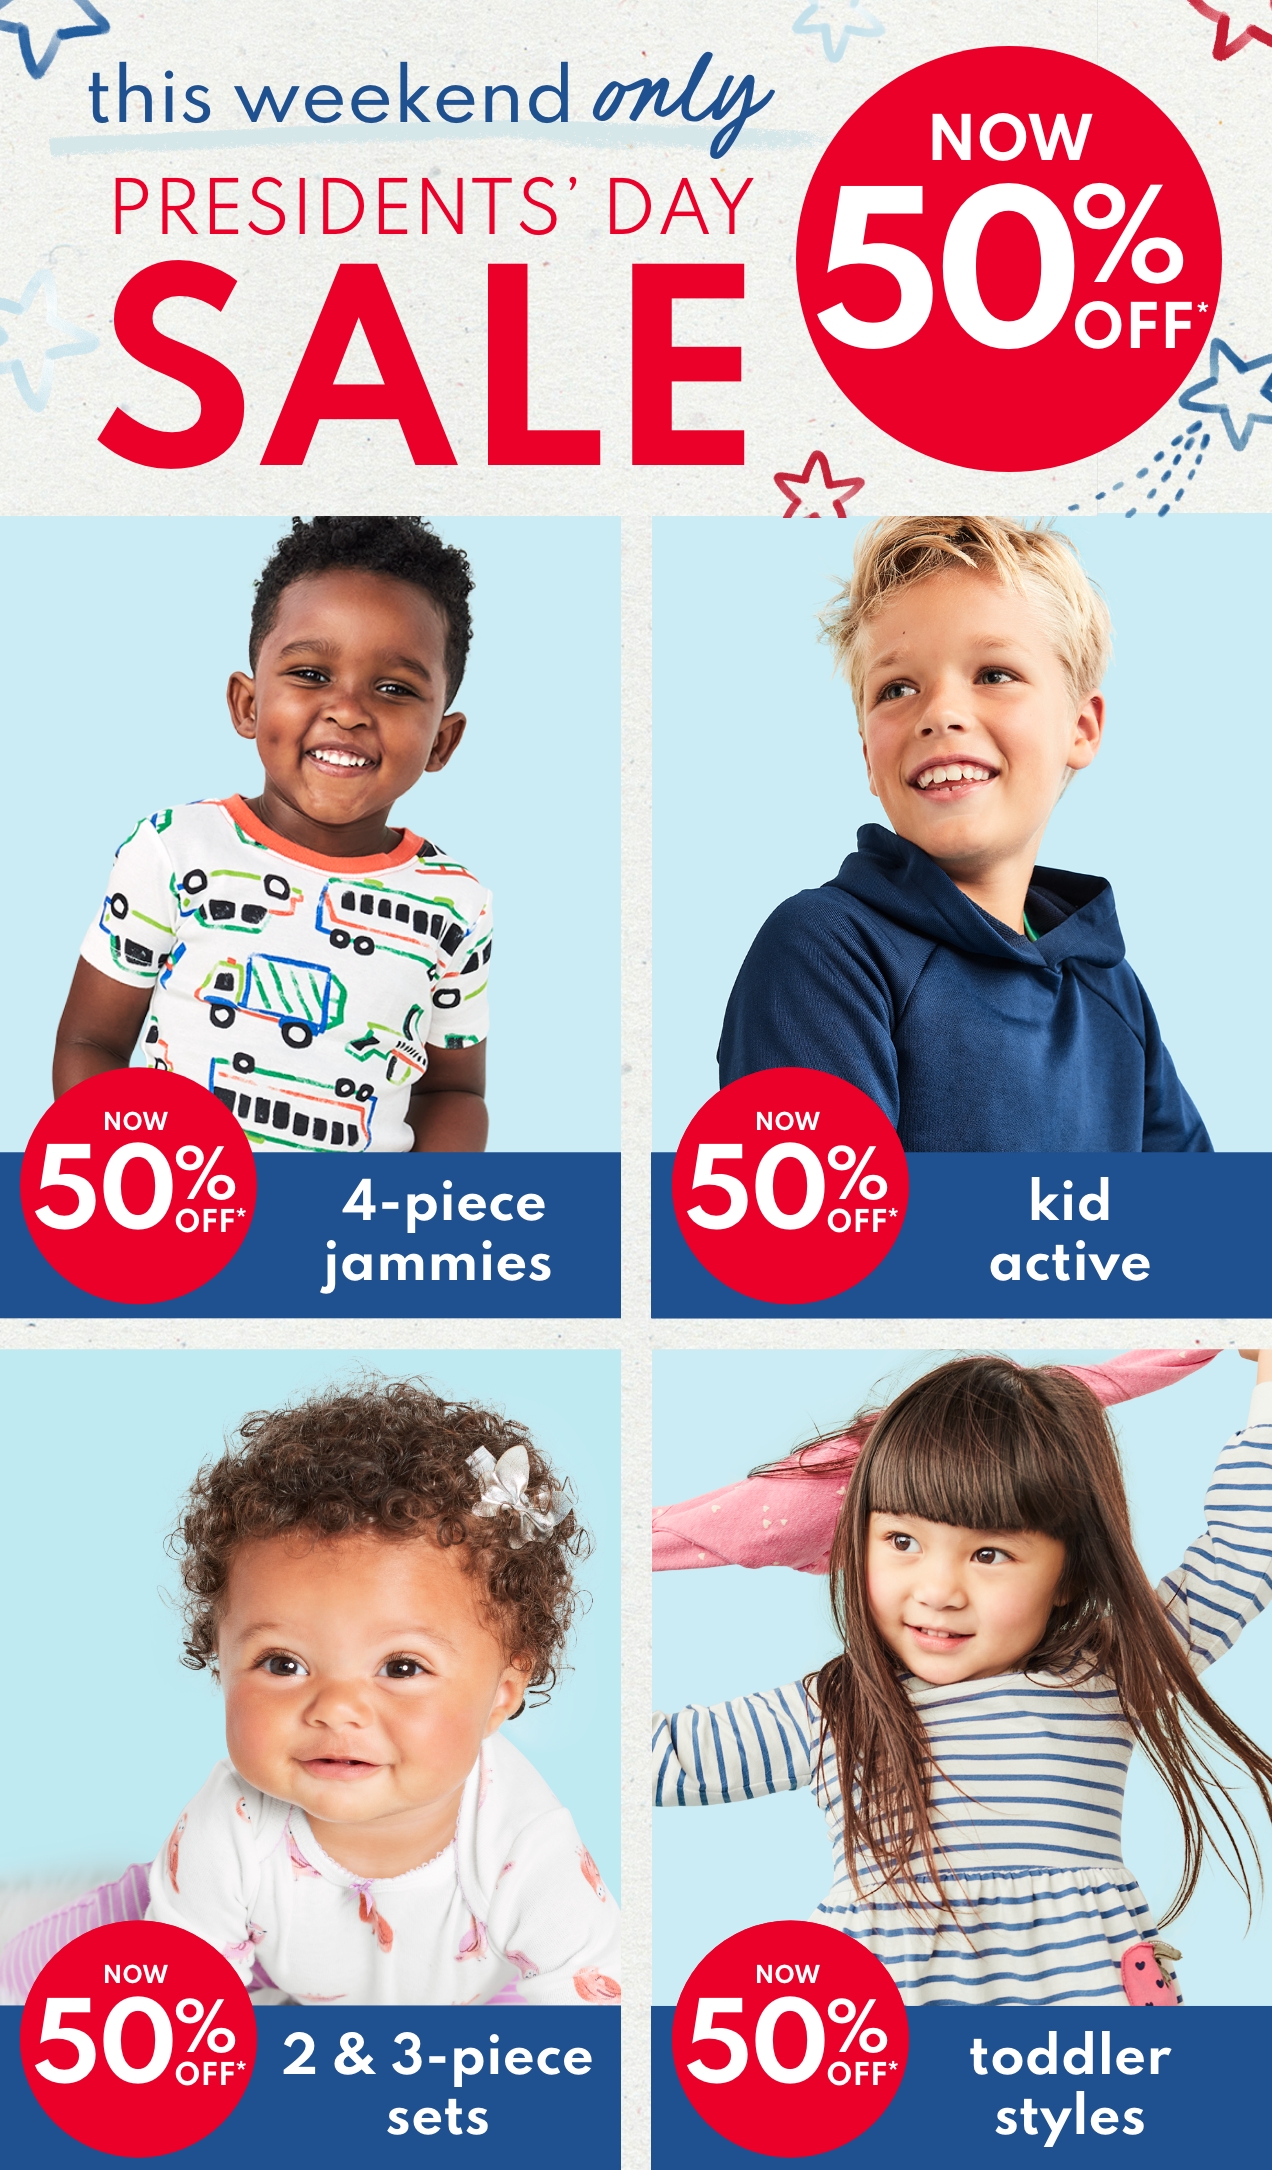 this weekend only | PRESIDENT'S DAY SALE | NOW 50% OFF* | NOW 50% OFF* | 4-piece jammies | NOW 50% OFF* kid active | NOW 50% OFF* 2 & 3-piece sets | NOW 50% off* | toddler styles